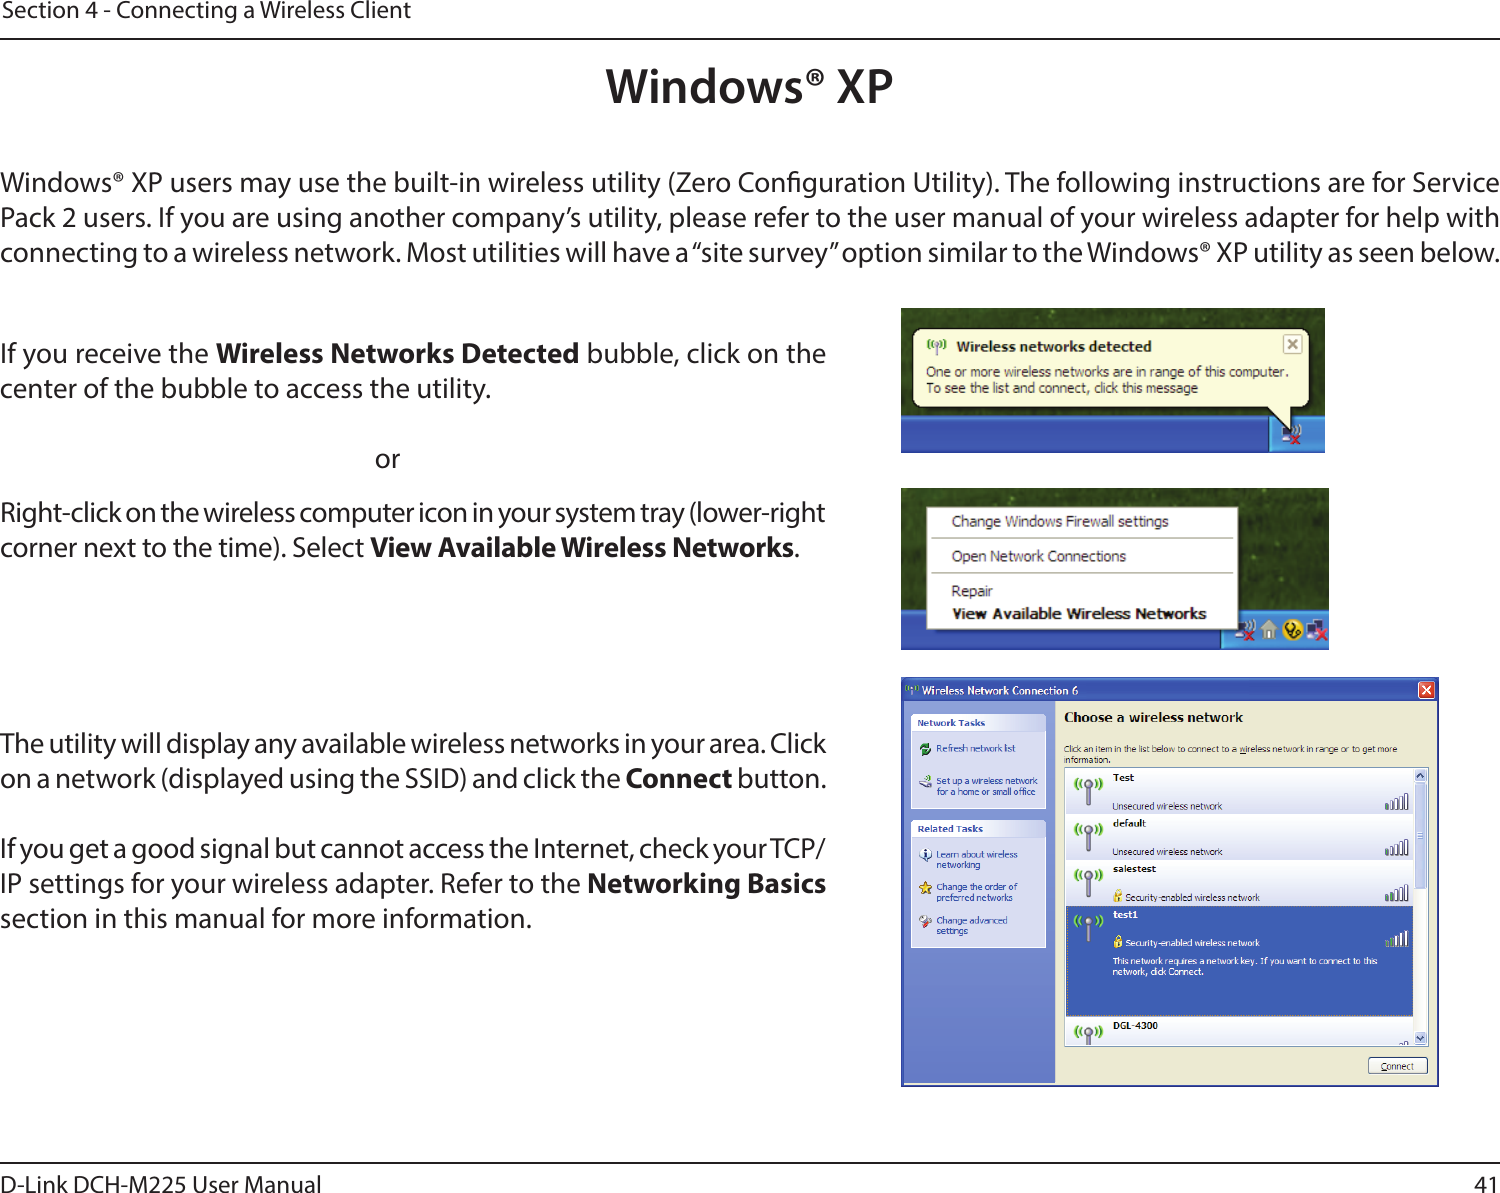 41D-Link DCH-M225 User ManualSection 4 - Connecting a Wireless ClientWindows® XPWindows® XP users may use the built-in wireless utility (Zero Conguration Utility). The following instructions are for Service Pack 2 users. If you are using another company’s utility, please refer to the user manual of your wireless adapter for help with connecting to a wireless network. Most utilities will have a “site survey” option similar to the Windows® XP utility as seen below.Right-click on the wireless computer icon in your system tray (lower-right corner next to the time). Select View Available Wireless Networks.If you receive the Wireless Networks Detected bubble, click on the center of the bubble to access the utility.     orThe utility will display any available wireless networks in your area. Click on a network (displayed using the SSID) and click the Connect button.If you get a good signal but cannot access the Internet, check your TCP/IP settings for your wireless adapter. Refer to the Networking Basics section in this manual for more information.